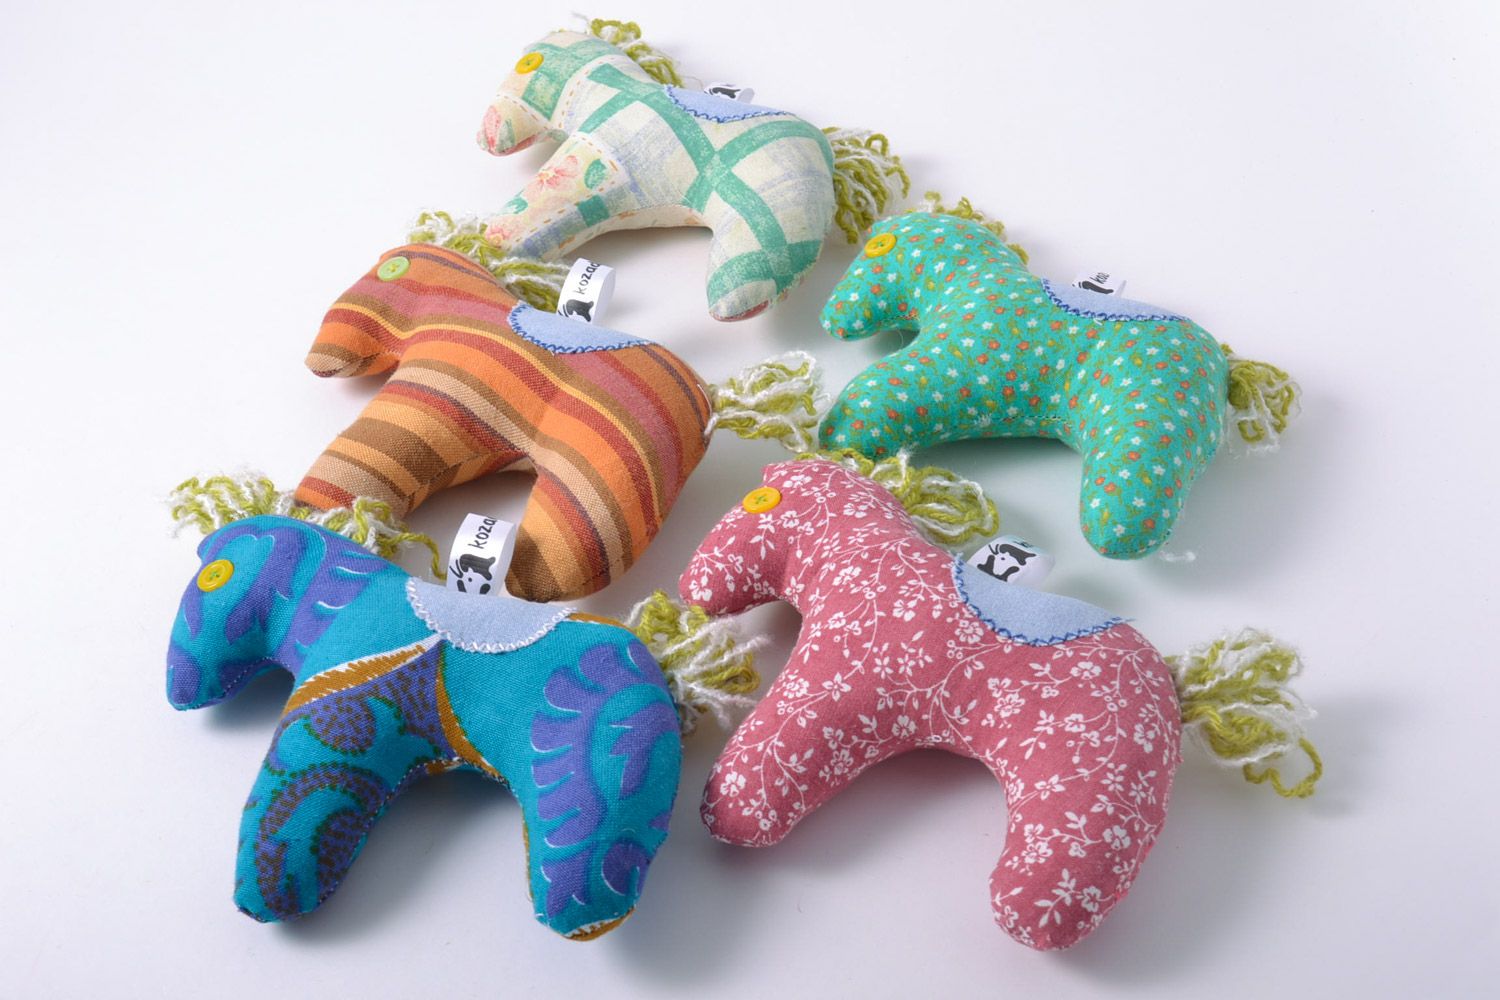 Set of 5 handmade colorful soft toys sewn of fabric Horses for kids and interior photo 2